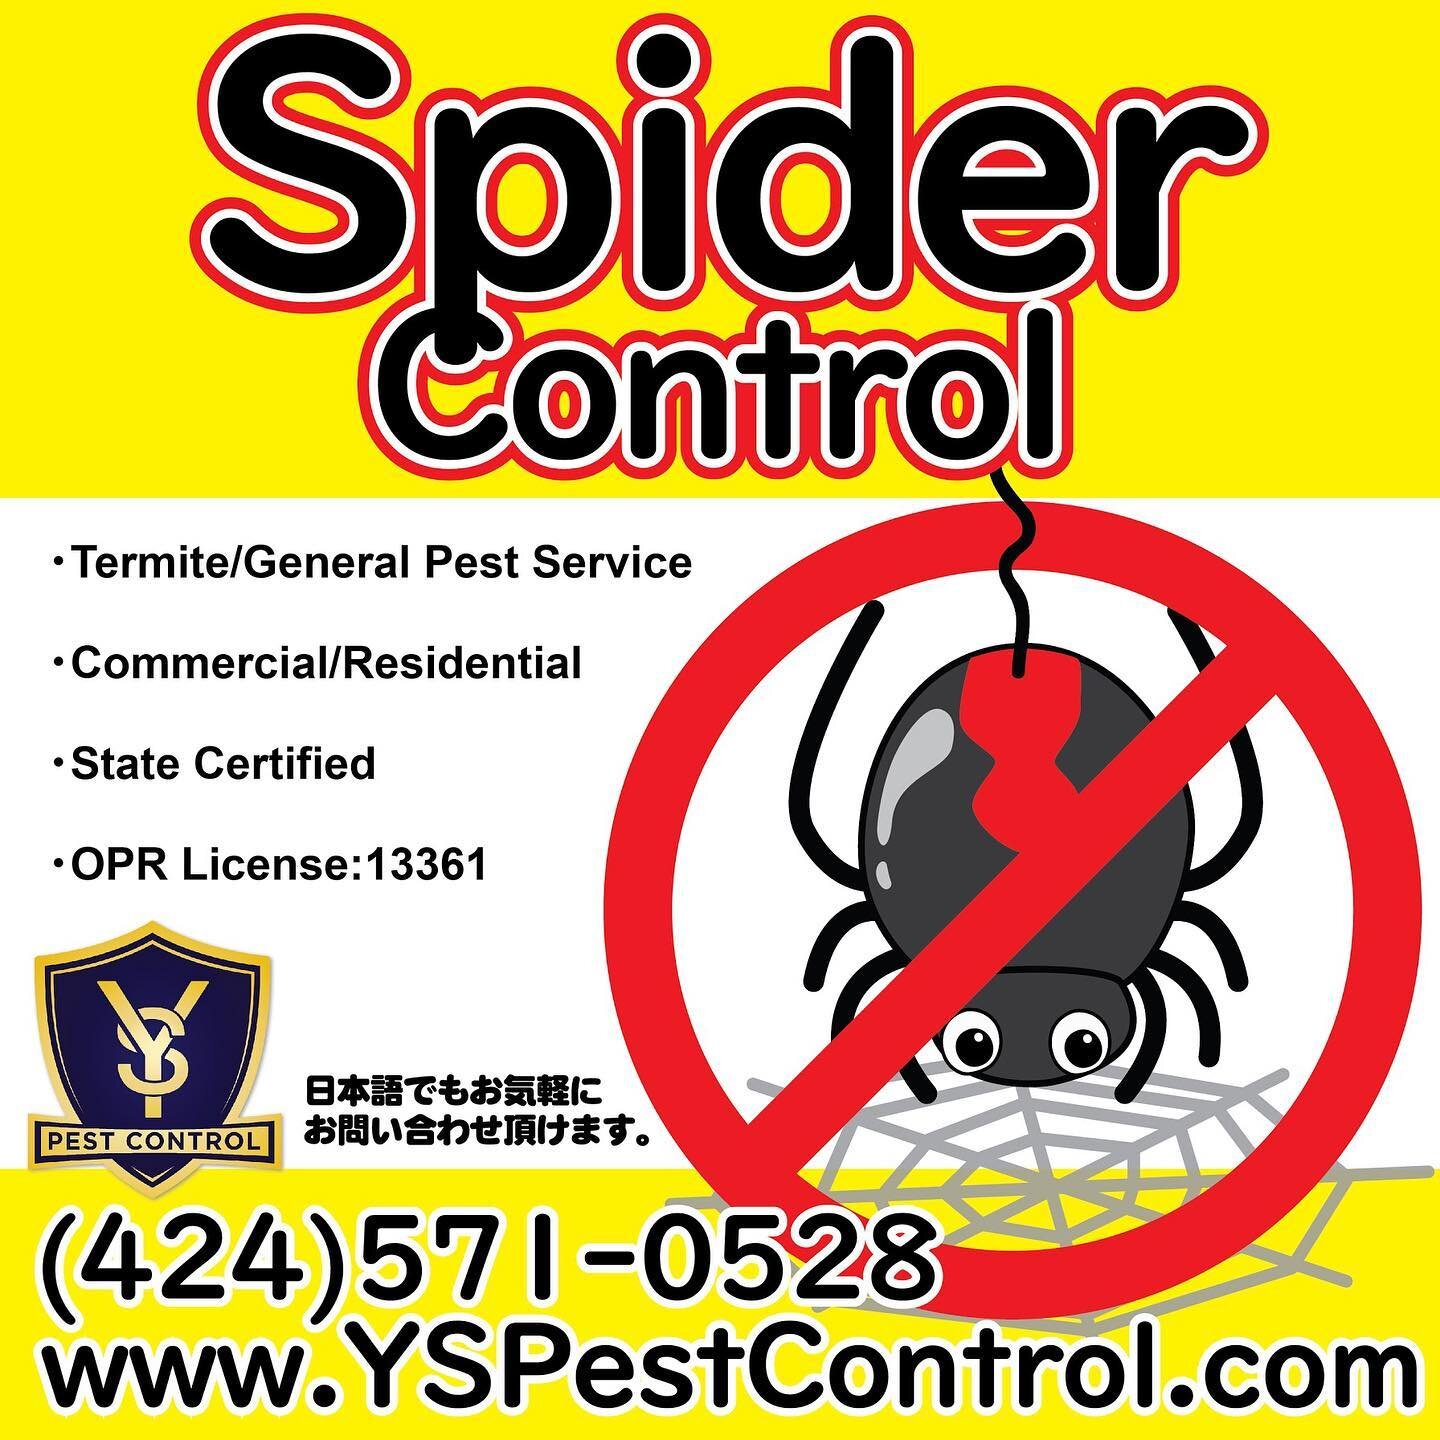 10% Discount for General Pest Control Service by Y&rsquo;s Pest Control. Discount will be applied till 5/15/21. #pestcontrol #ant #spider #roaches #rat #mice